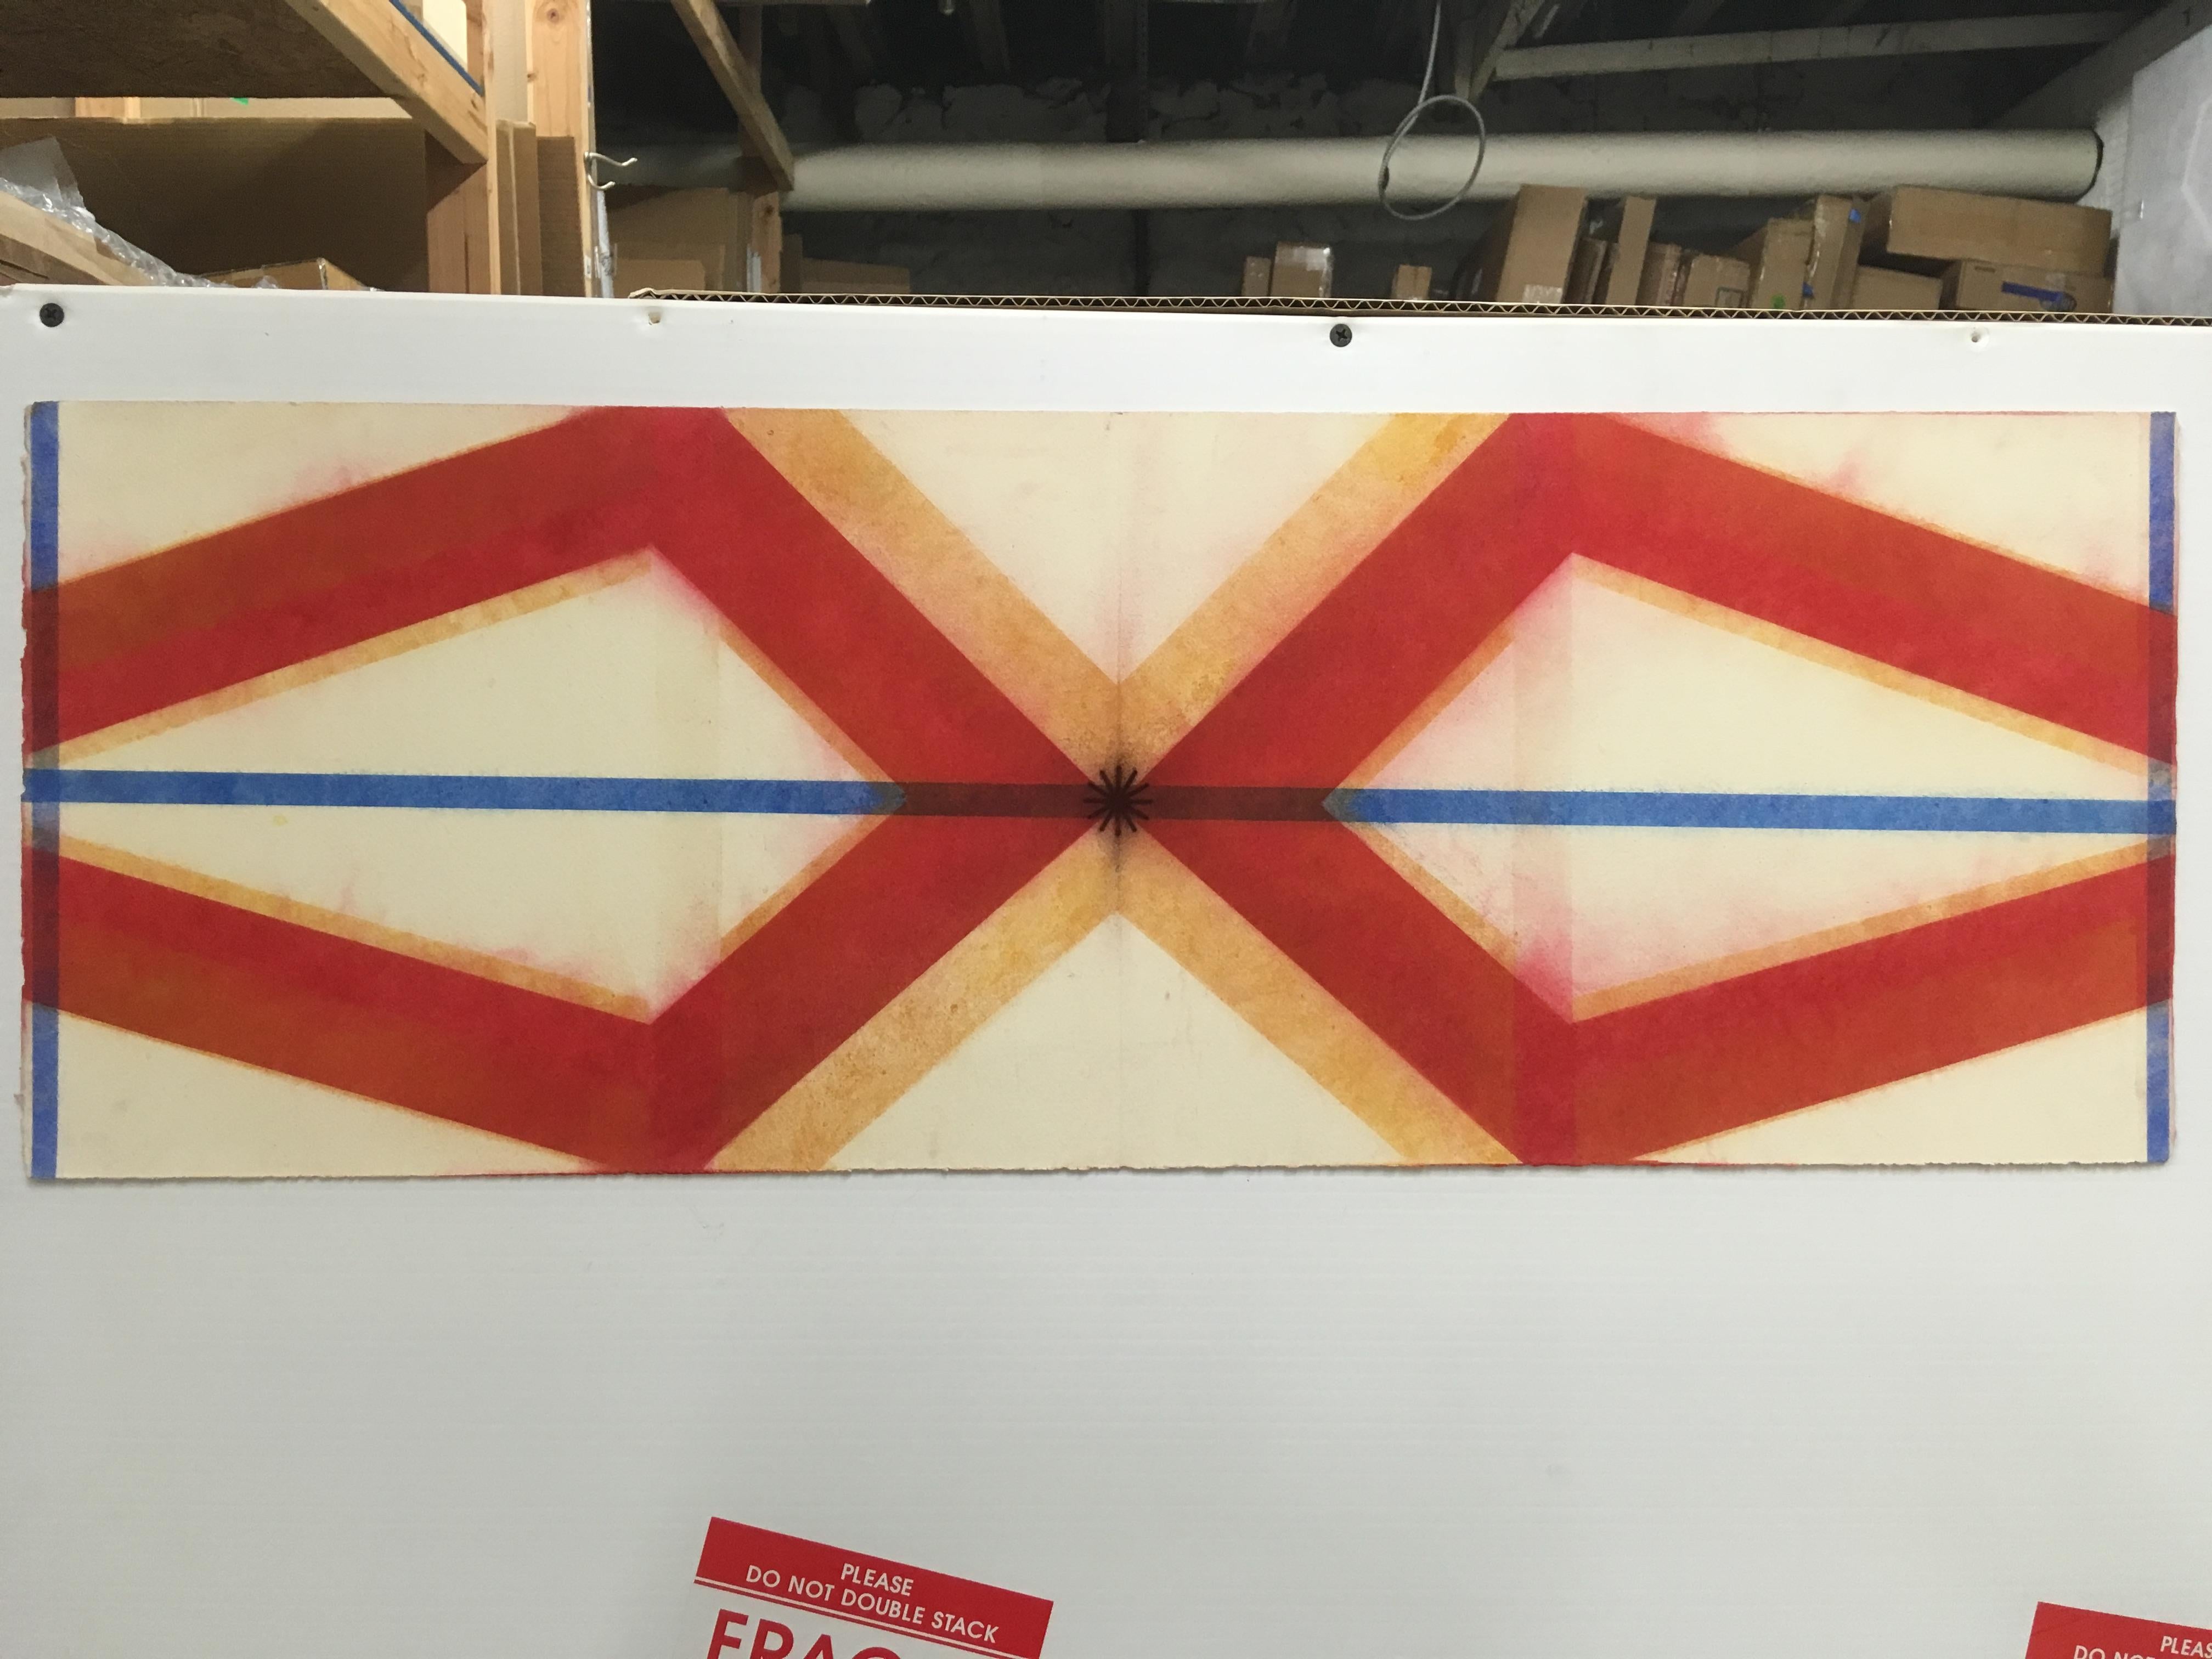 The ordered symmetry of the layered diagonal lines in deep reddish orange, pale yellow orange, cobalt blue and dark red is powerful and elegant. This work is created with powdered pigment, a technique that adds softness to the geometric composition.